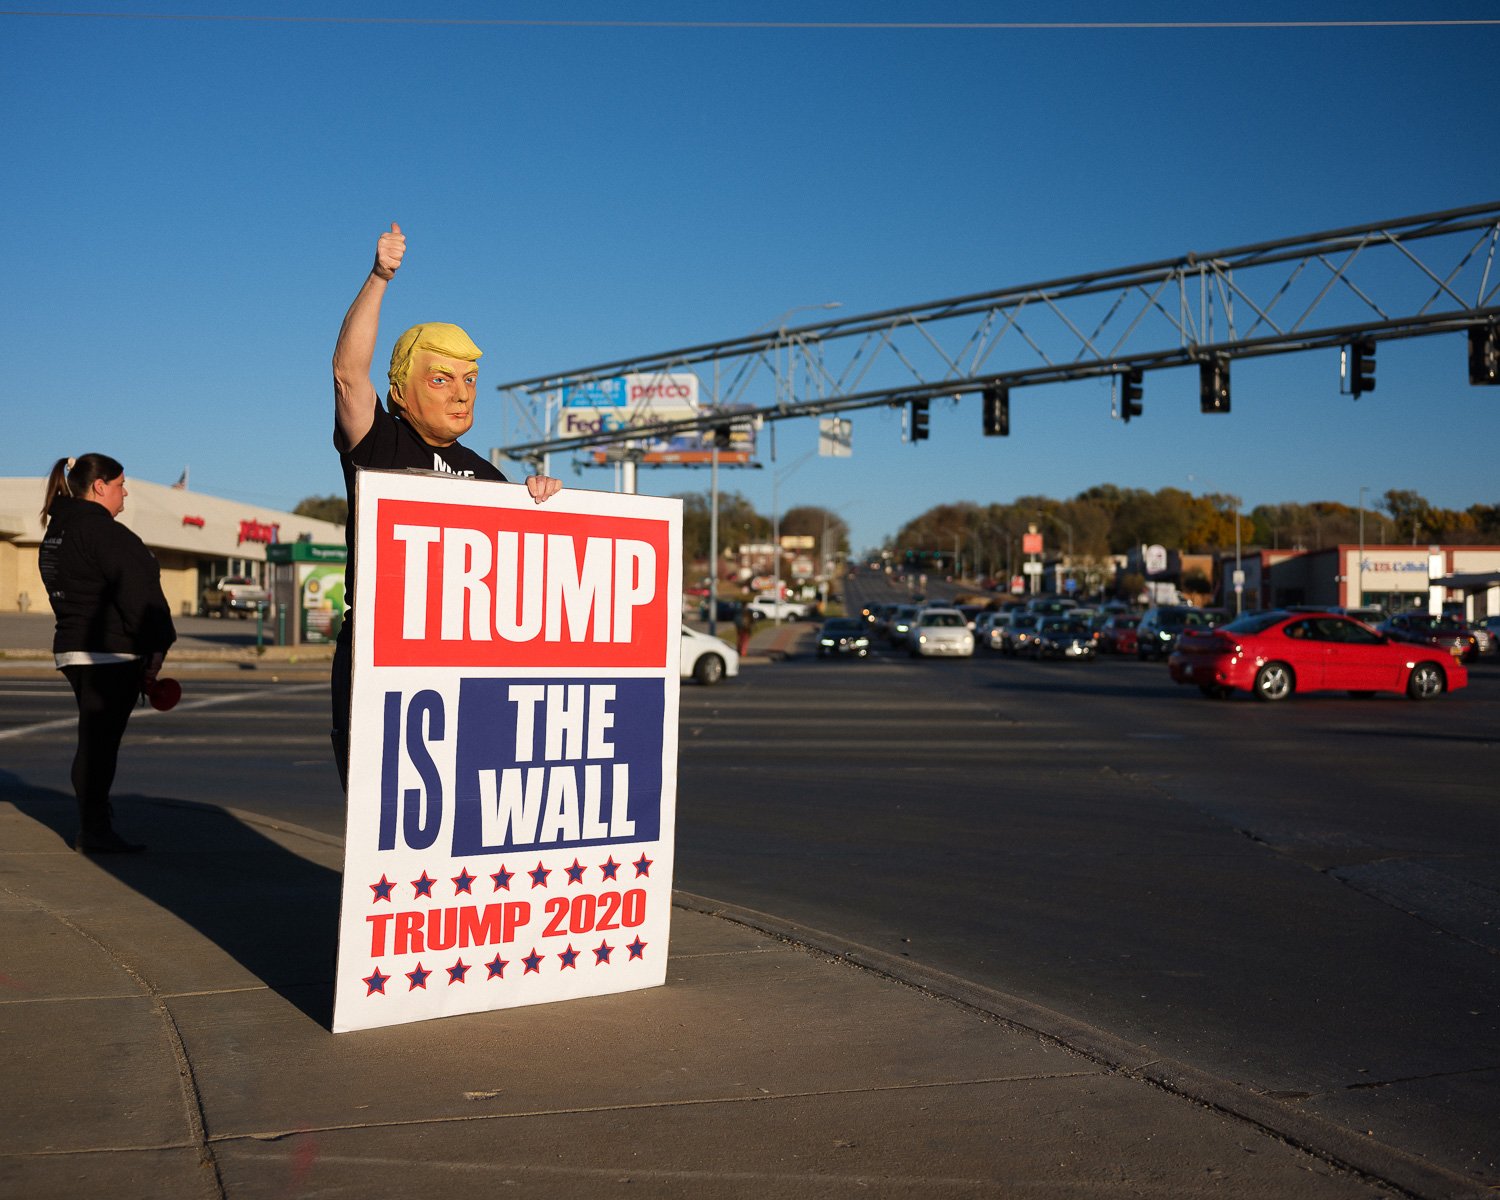  A masked Trump supporter on the corner of 72nd and Dodge, Omaha, NE, for Vanity Fair, 2020 